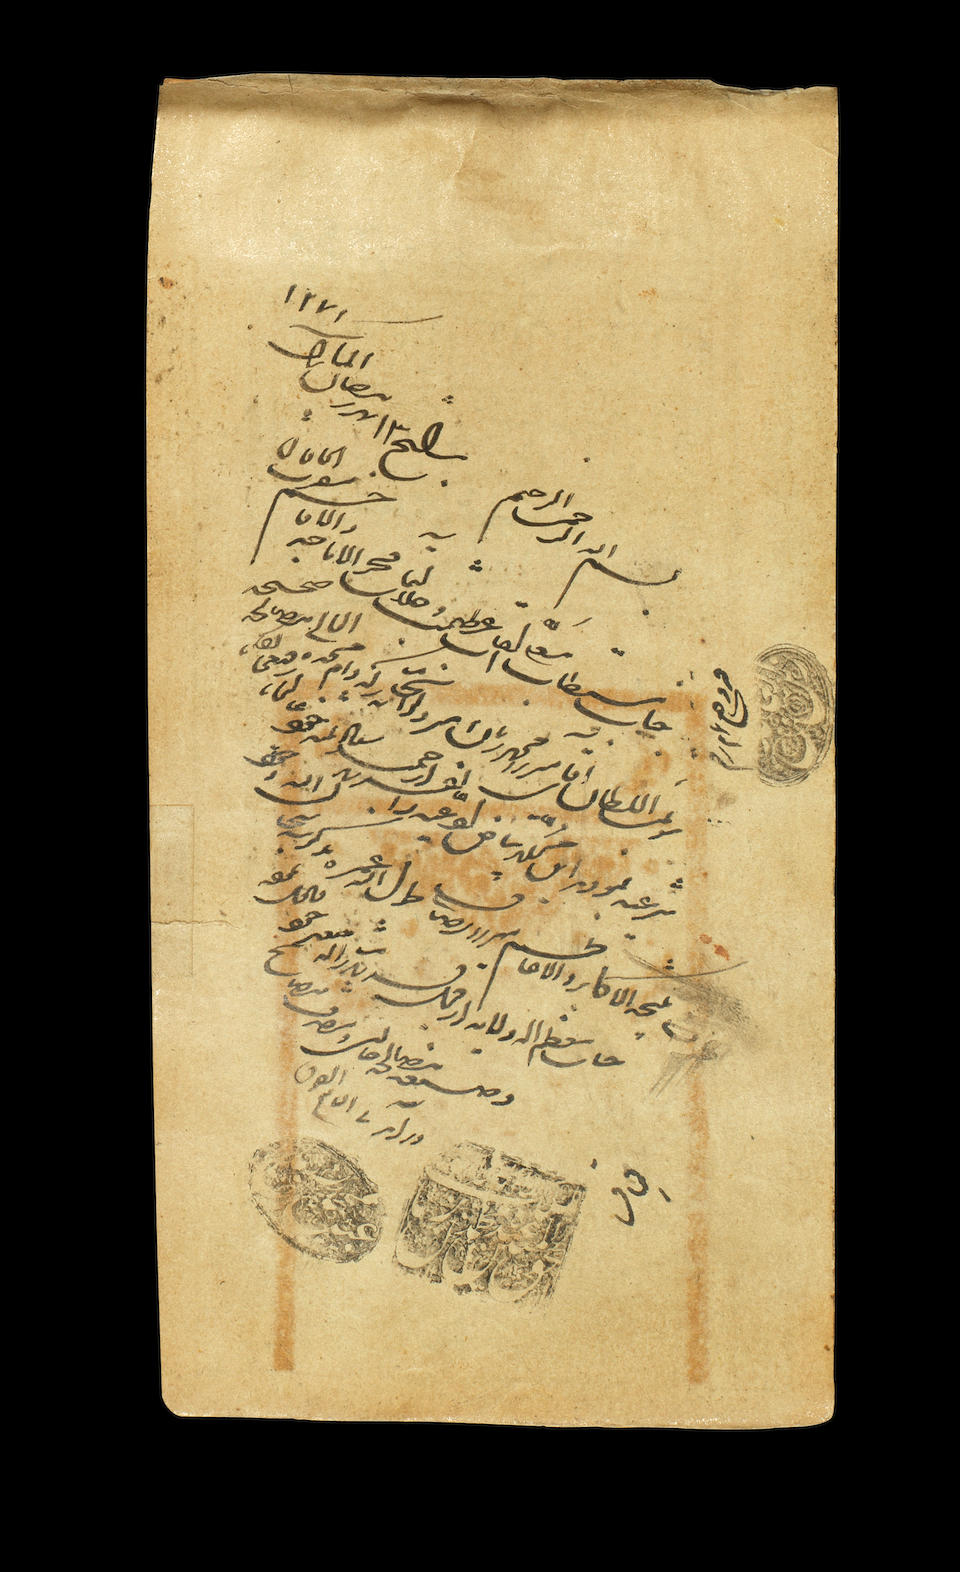 A prayer book in safinah form, copied by the famous calligrapher Ahmad al-Nayrizi (d. AH 1155/AD 1742-43), commissioned by a certain Muhammad 'Ali Khan Qaraguzlu Persia, dated AH 1133/AD 1720-21